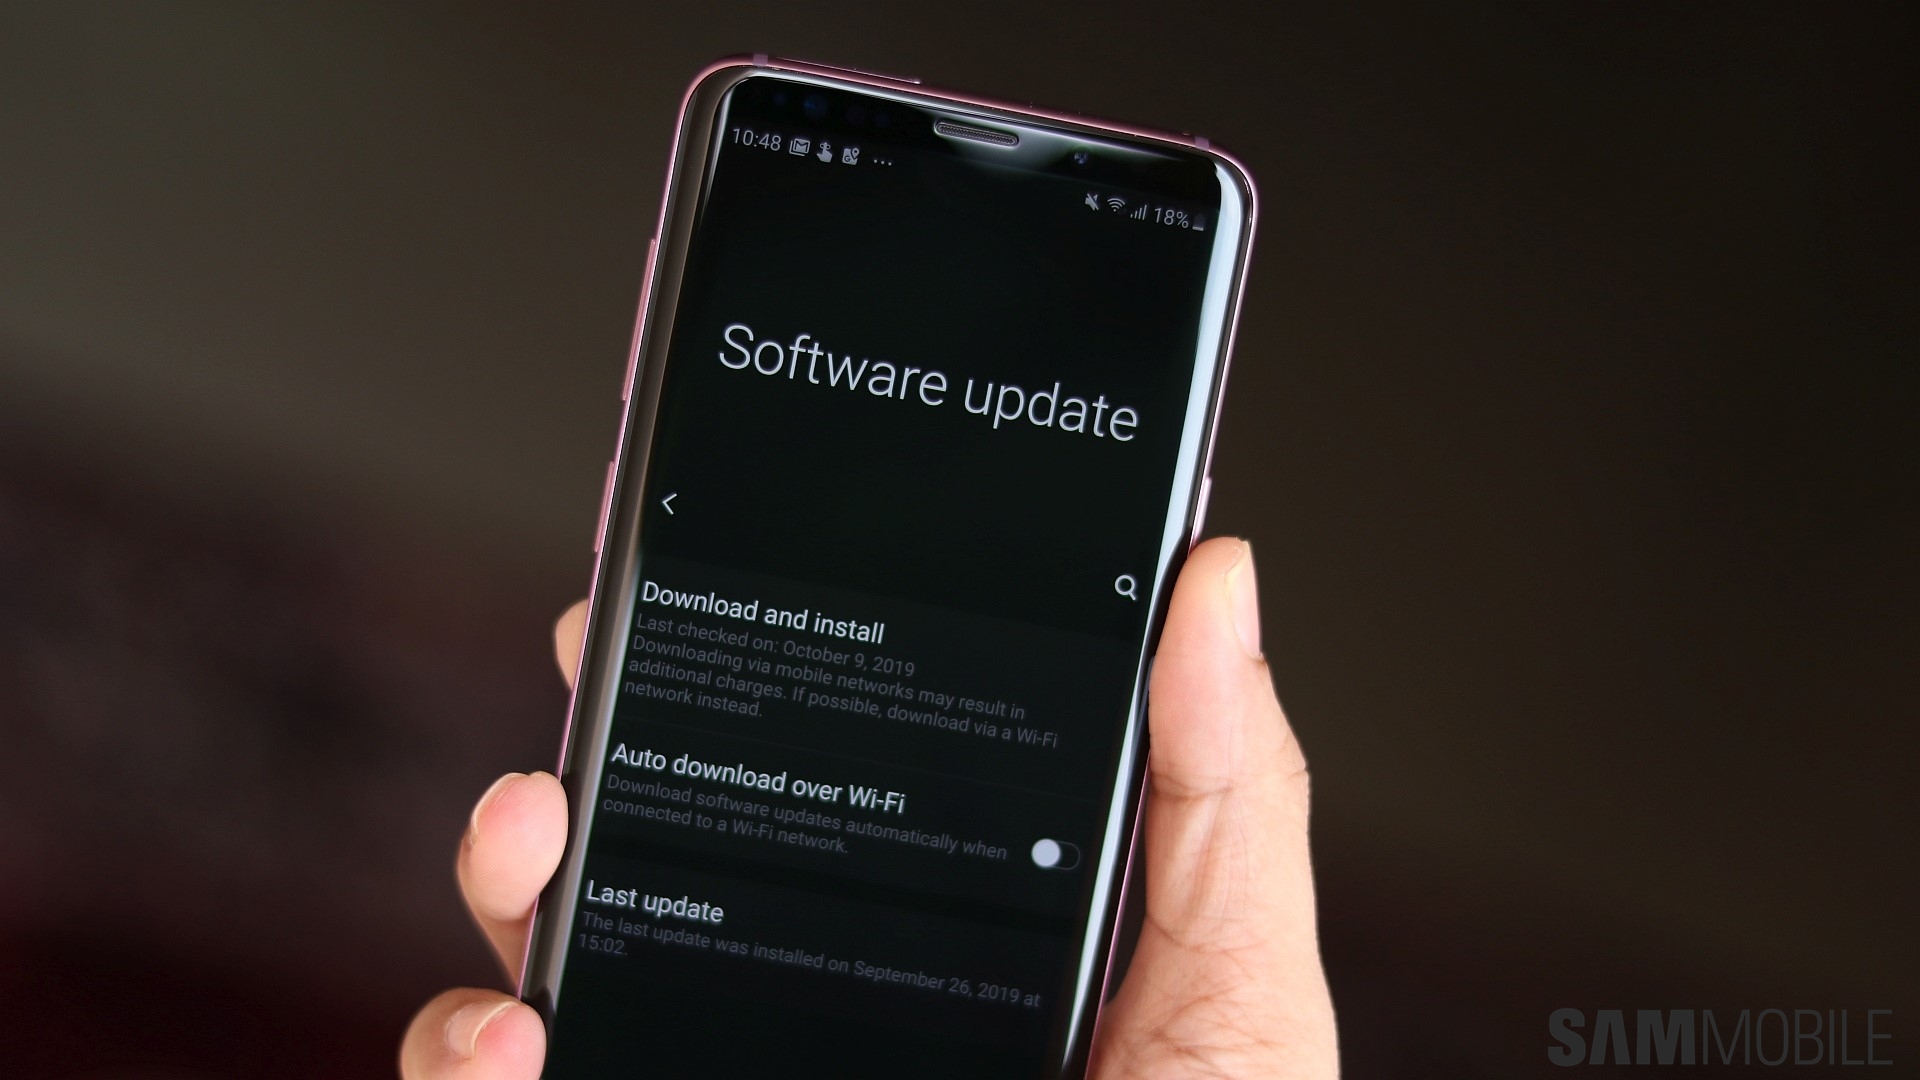 Giving Morning Deliberate Galaxy S9 One UI 2.1 update slated for June release in Korea - SamMobile